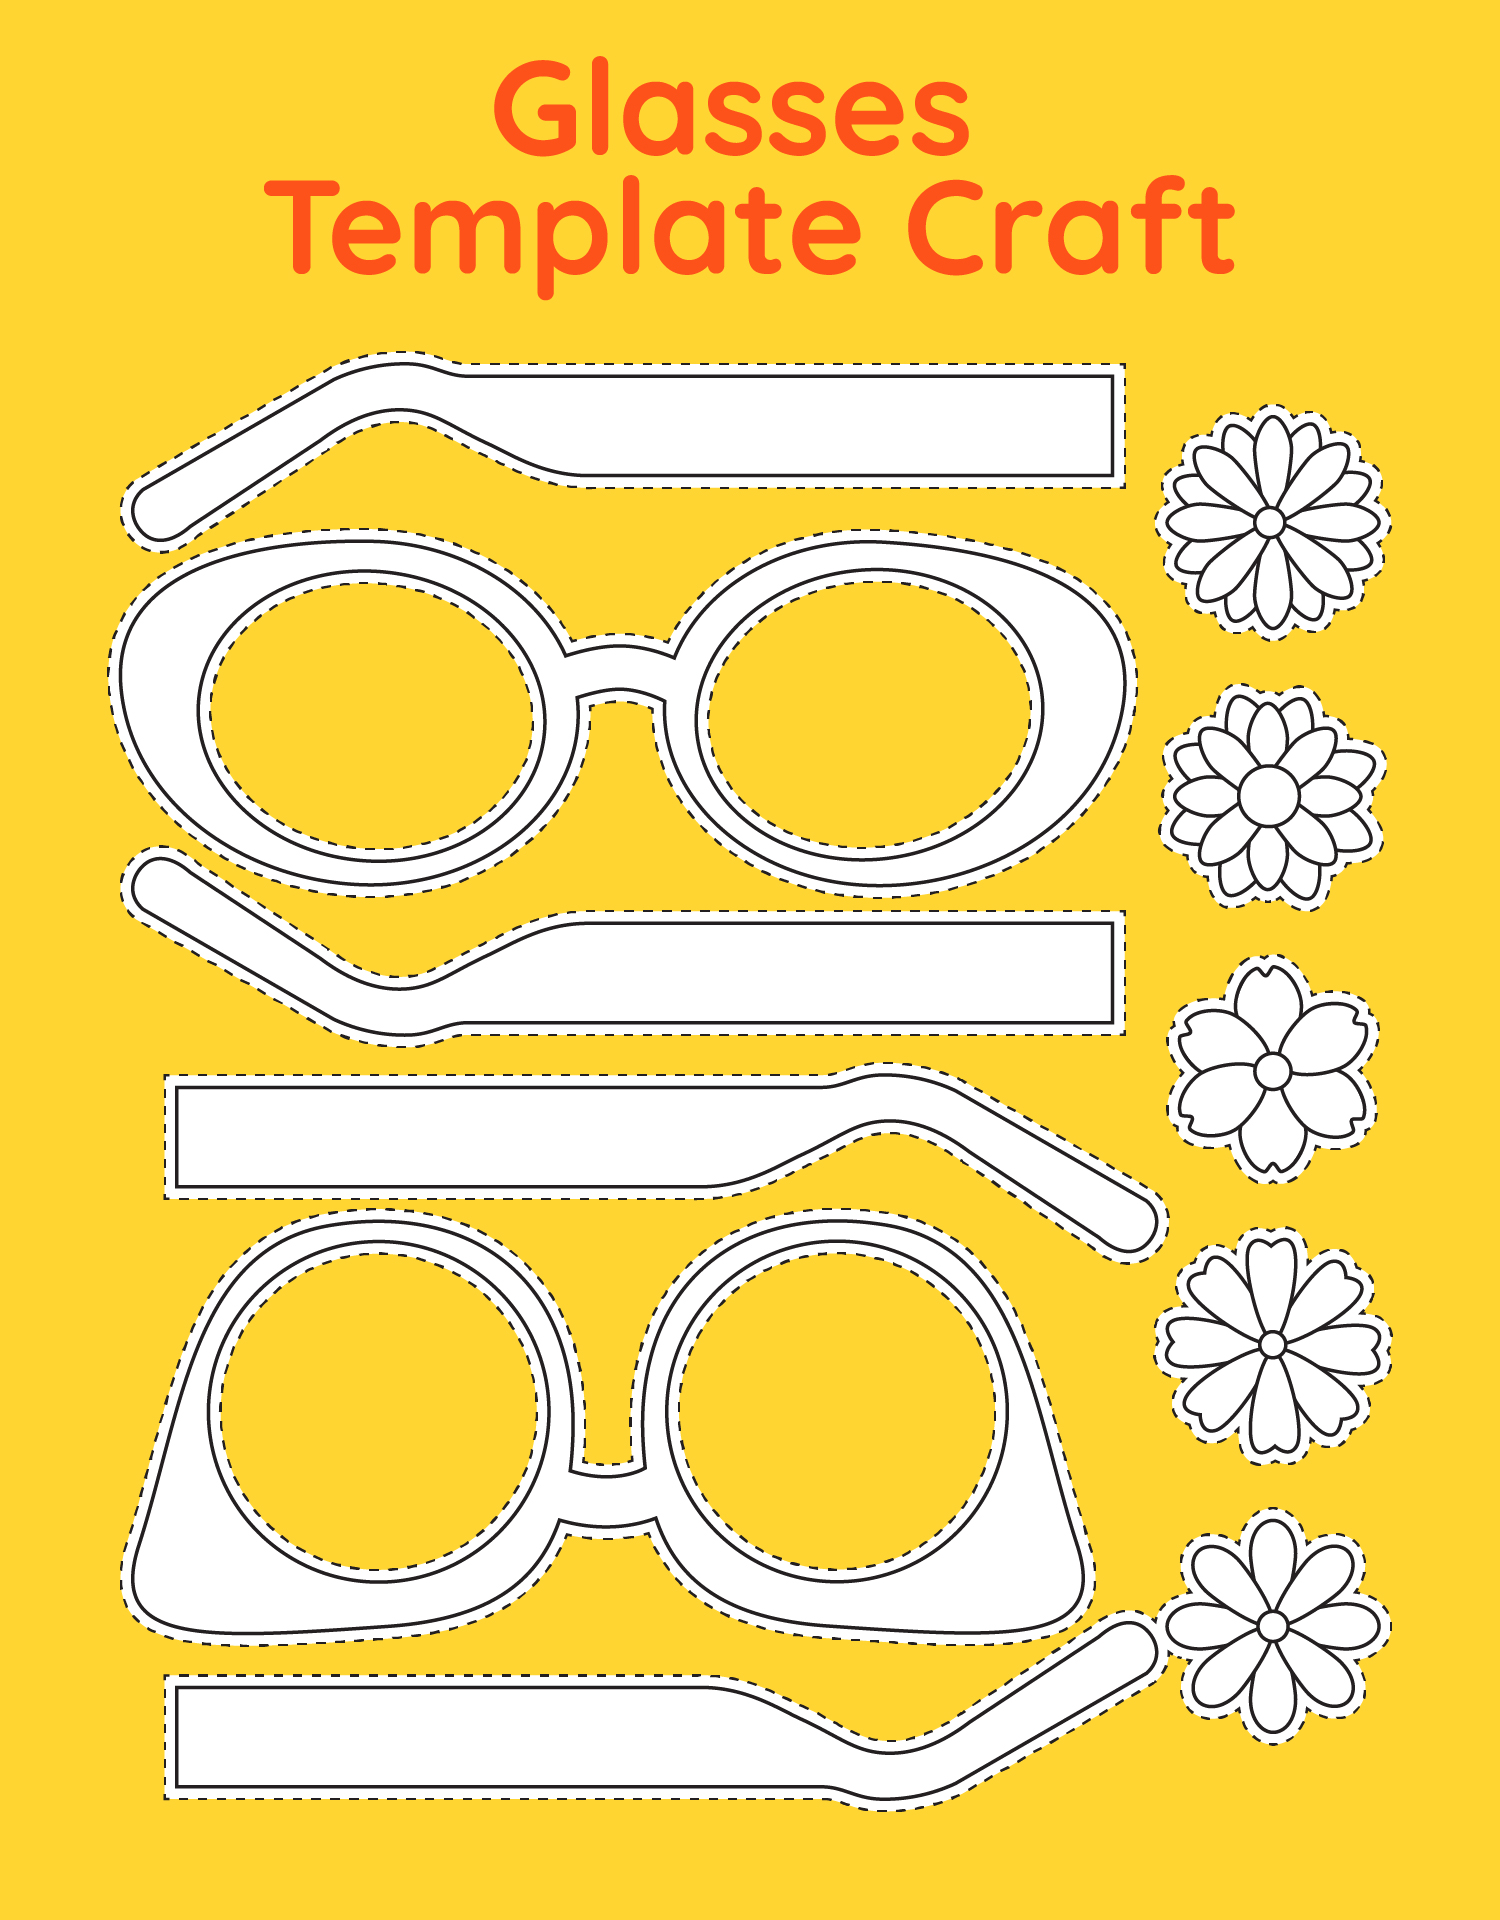 Glasses Template Craft Activity Printable